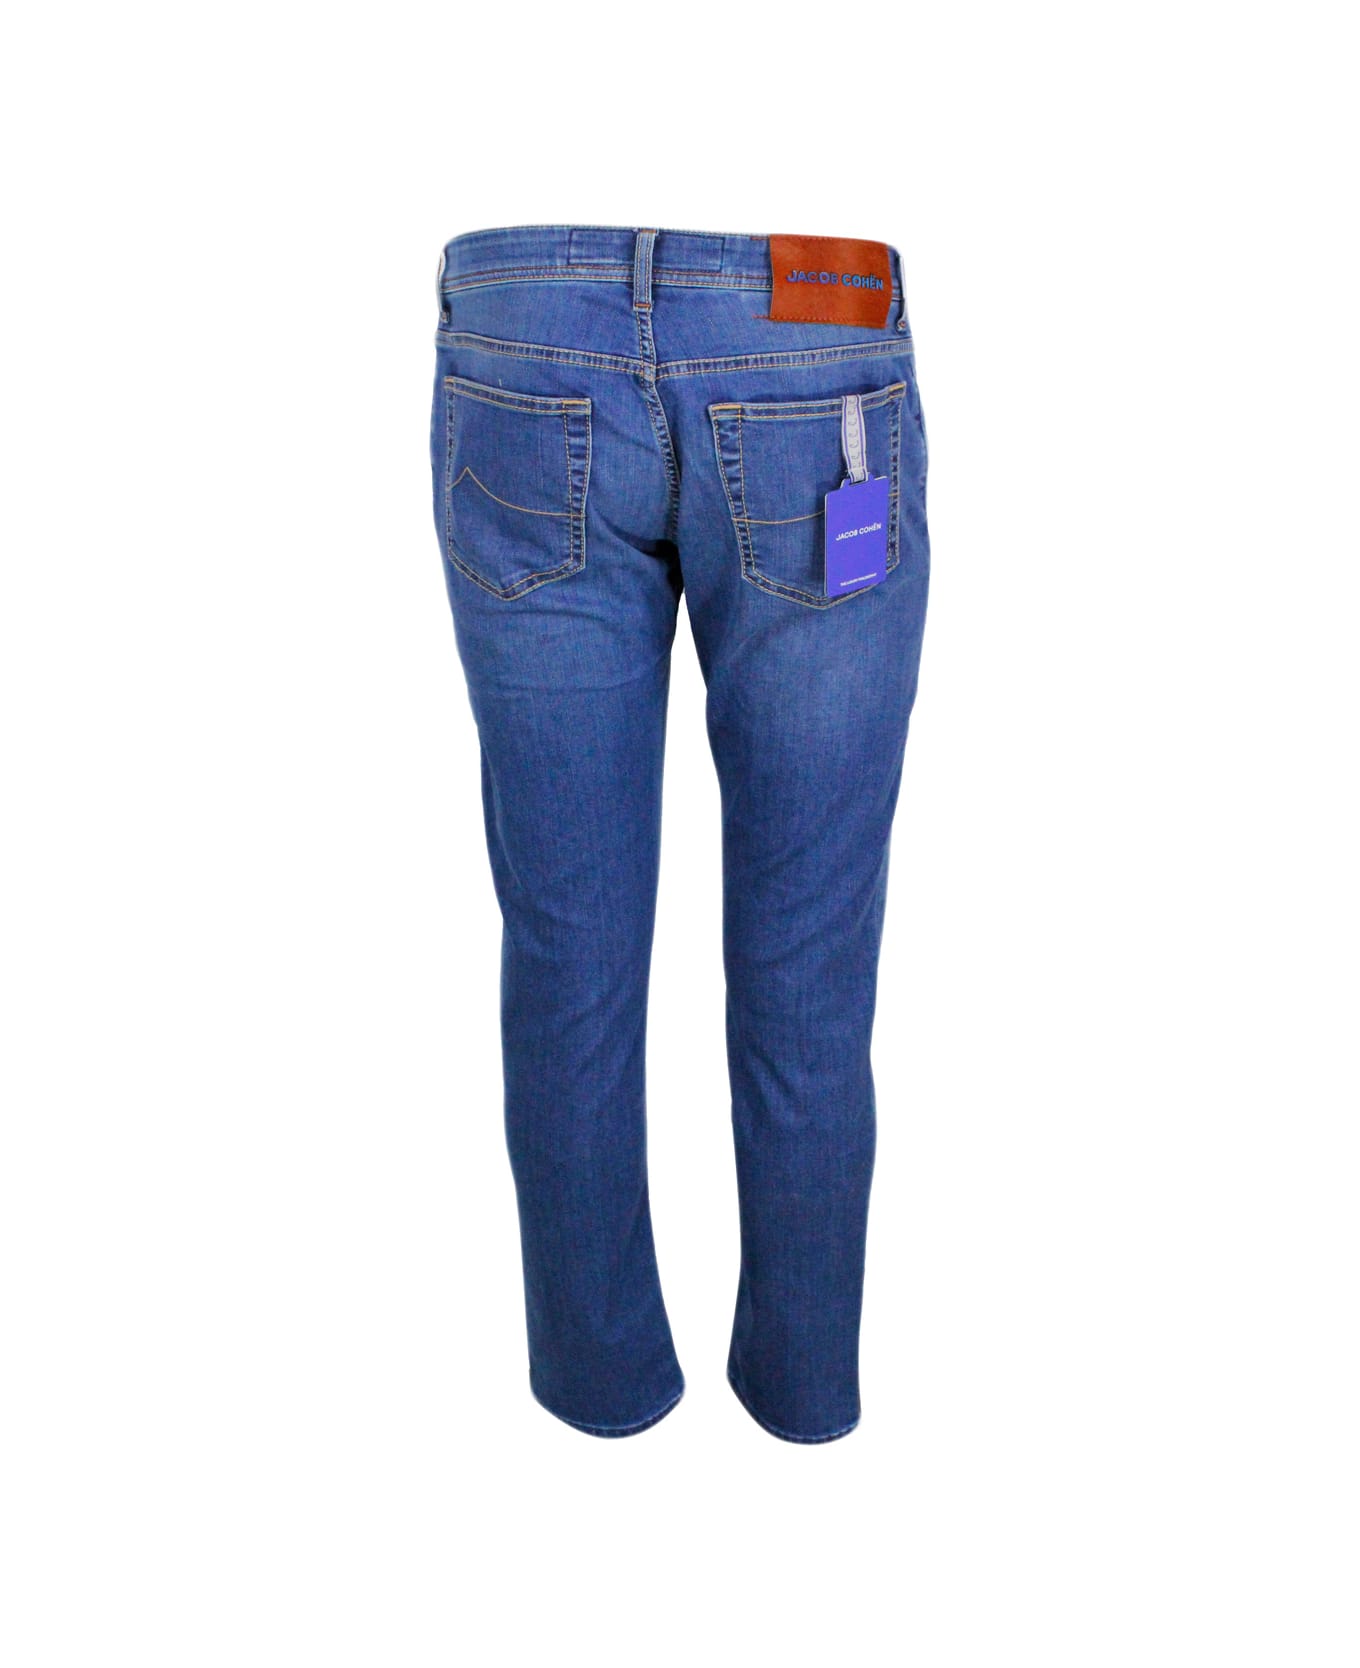 Jacob Cohen Bard J688 Luxury Edition Denim Trousers In Soft Stretch Denim With 5 Pockets With Closure Buttons And Lacquered Pony Skin Button With Logo - Denim